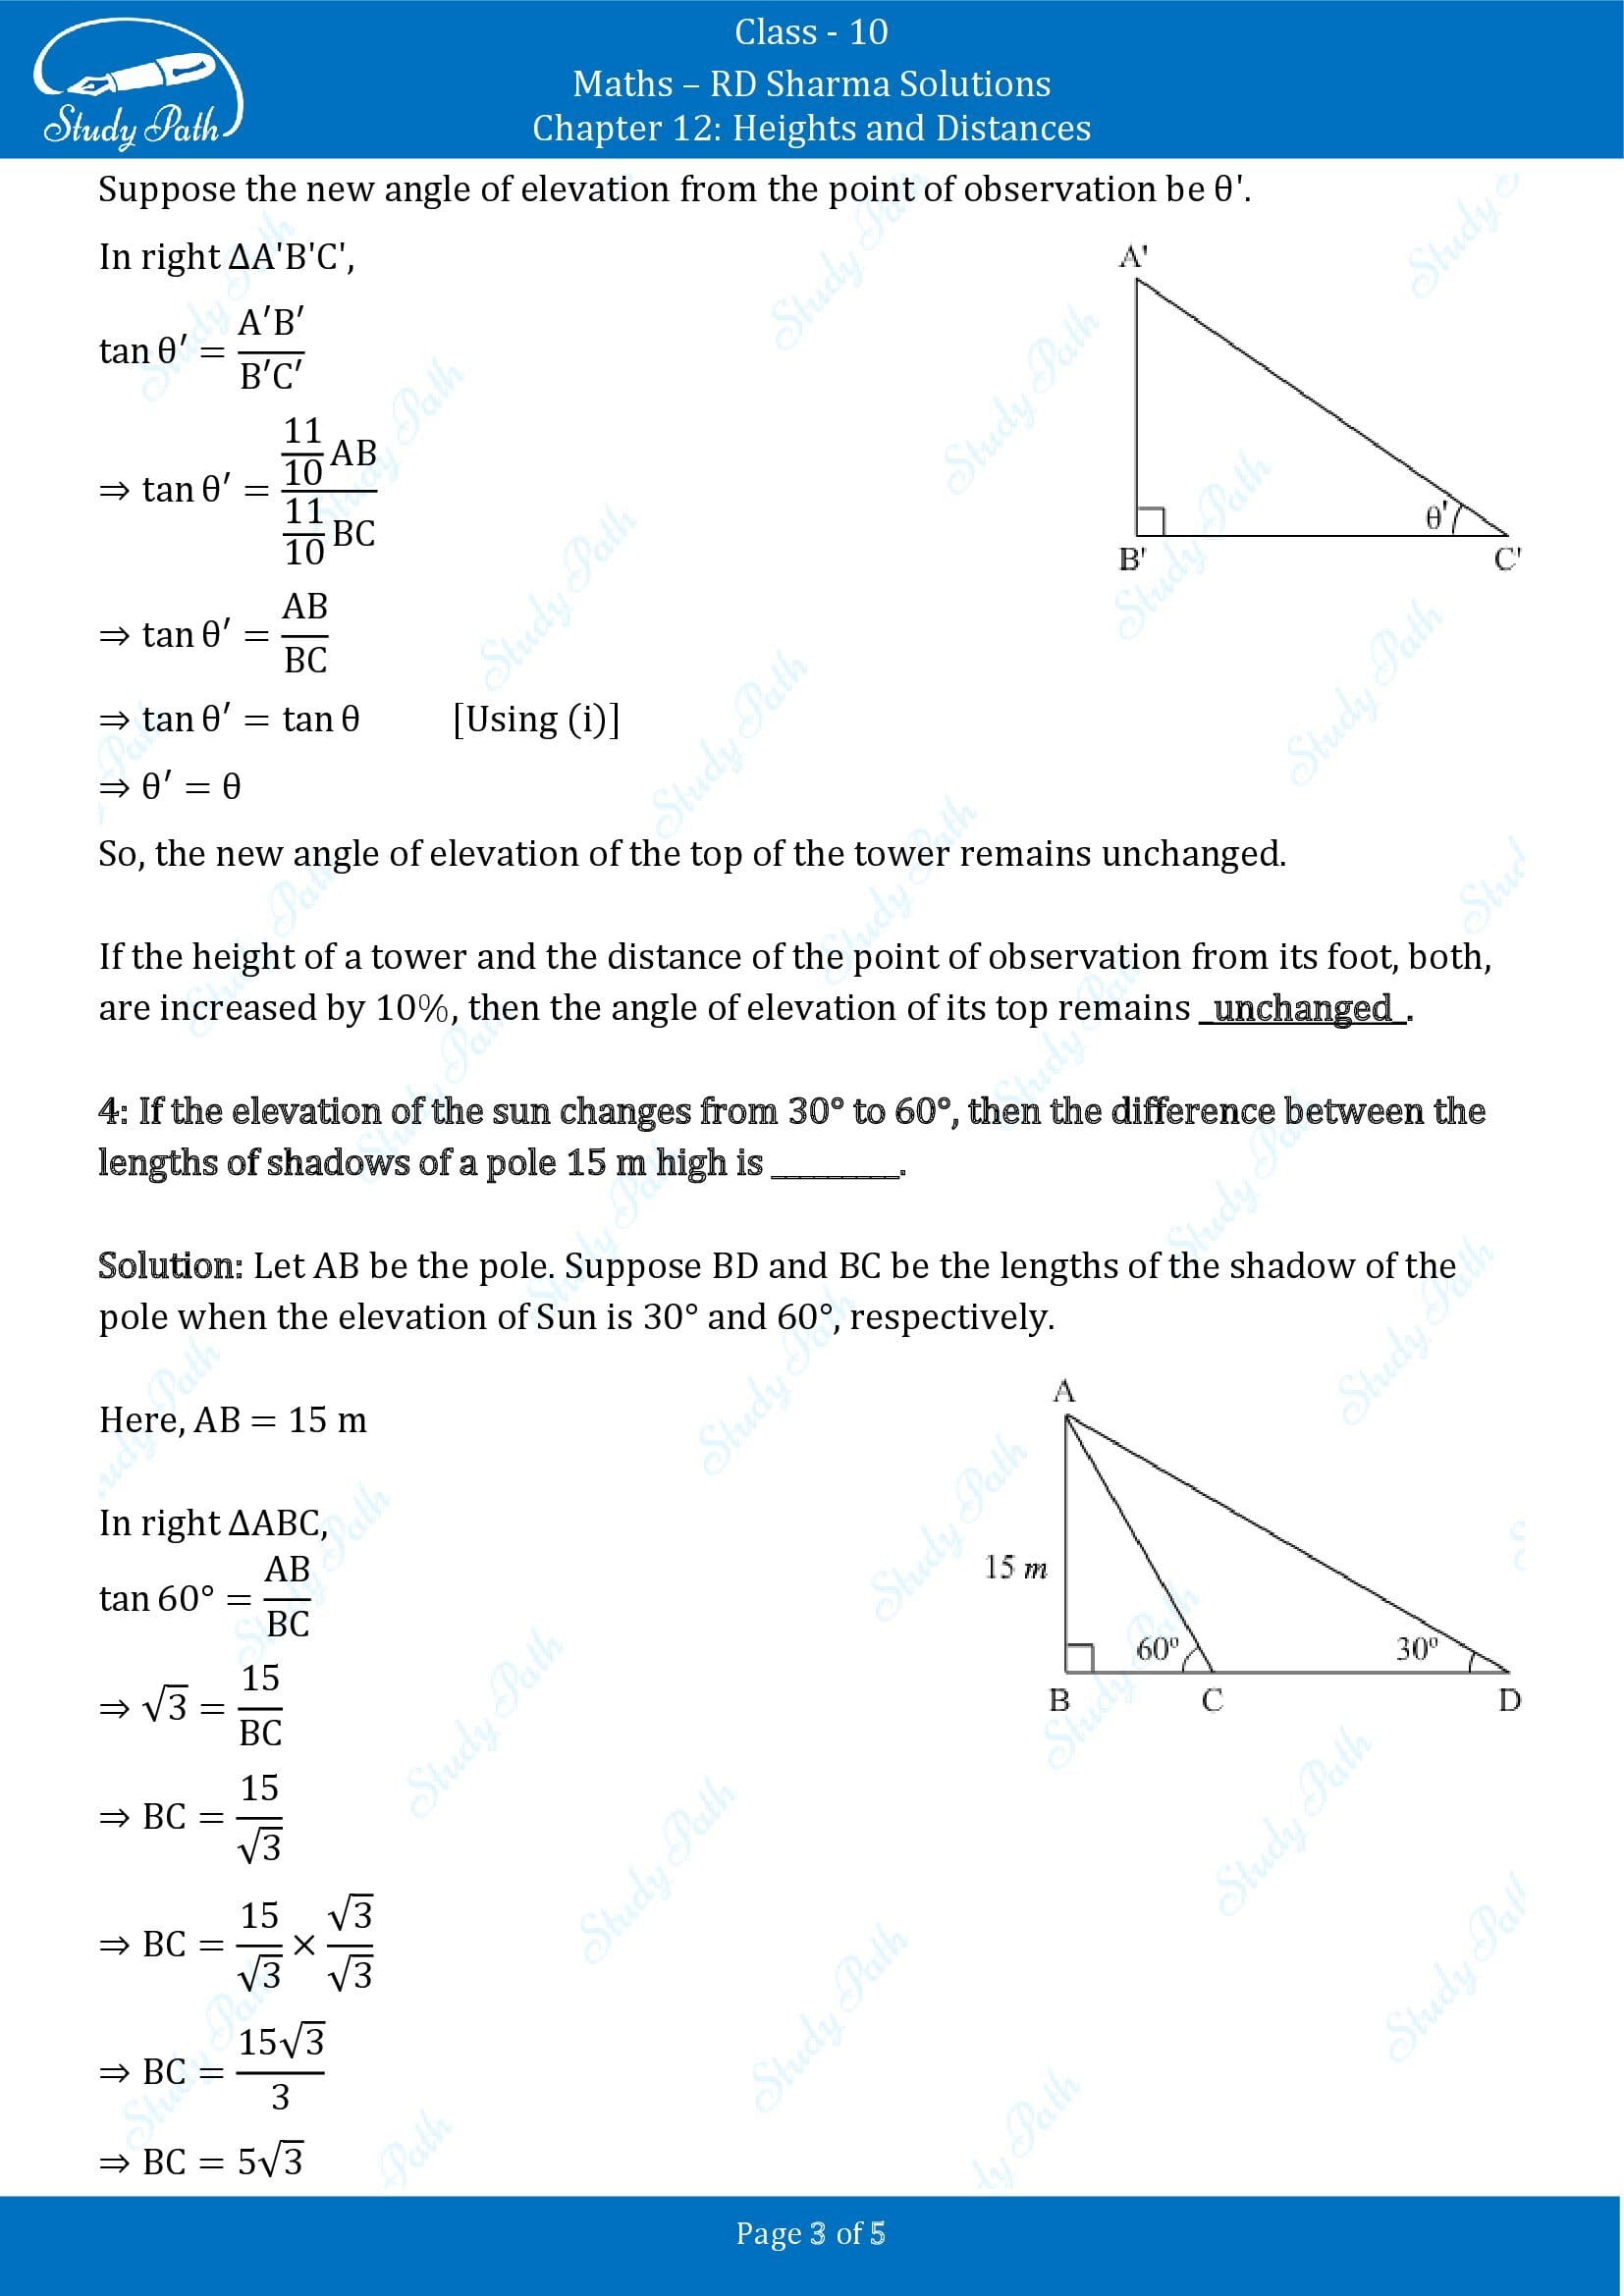 RD Sharma Solutions Class 10 Chapter 12 Heights and Distances Fill in the Blank Type Questions FBQs 00003